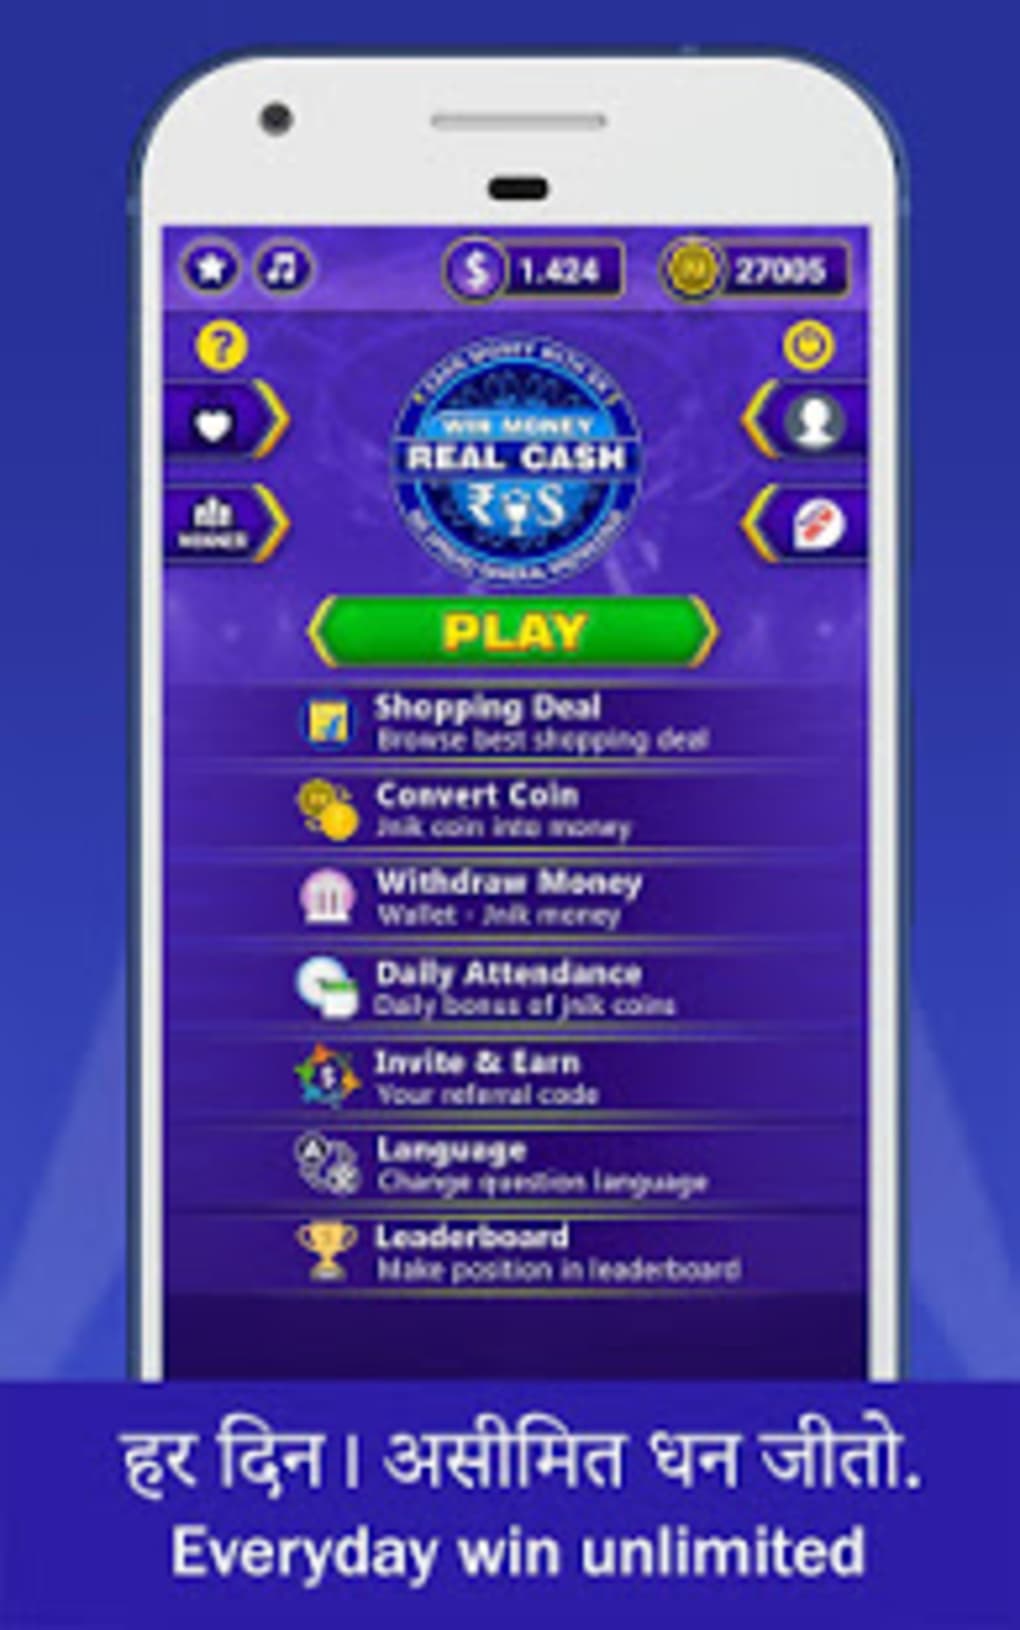 Play gk quiz games online and win money t